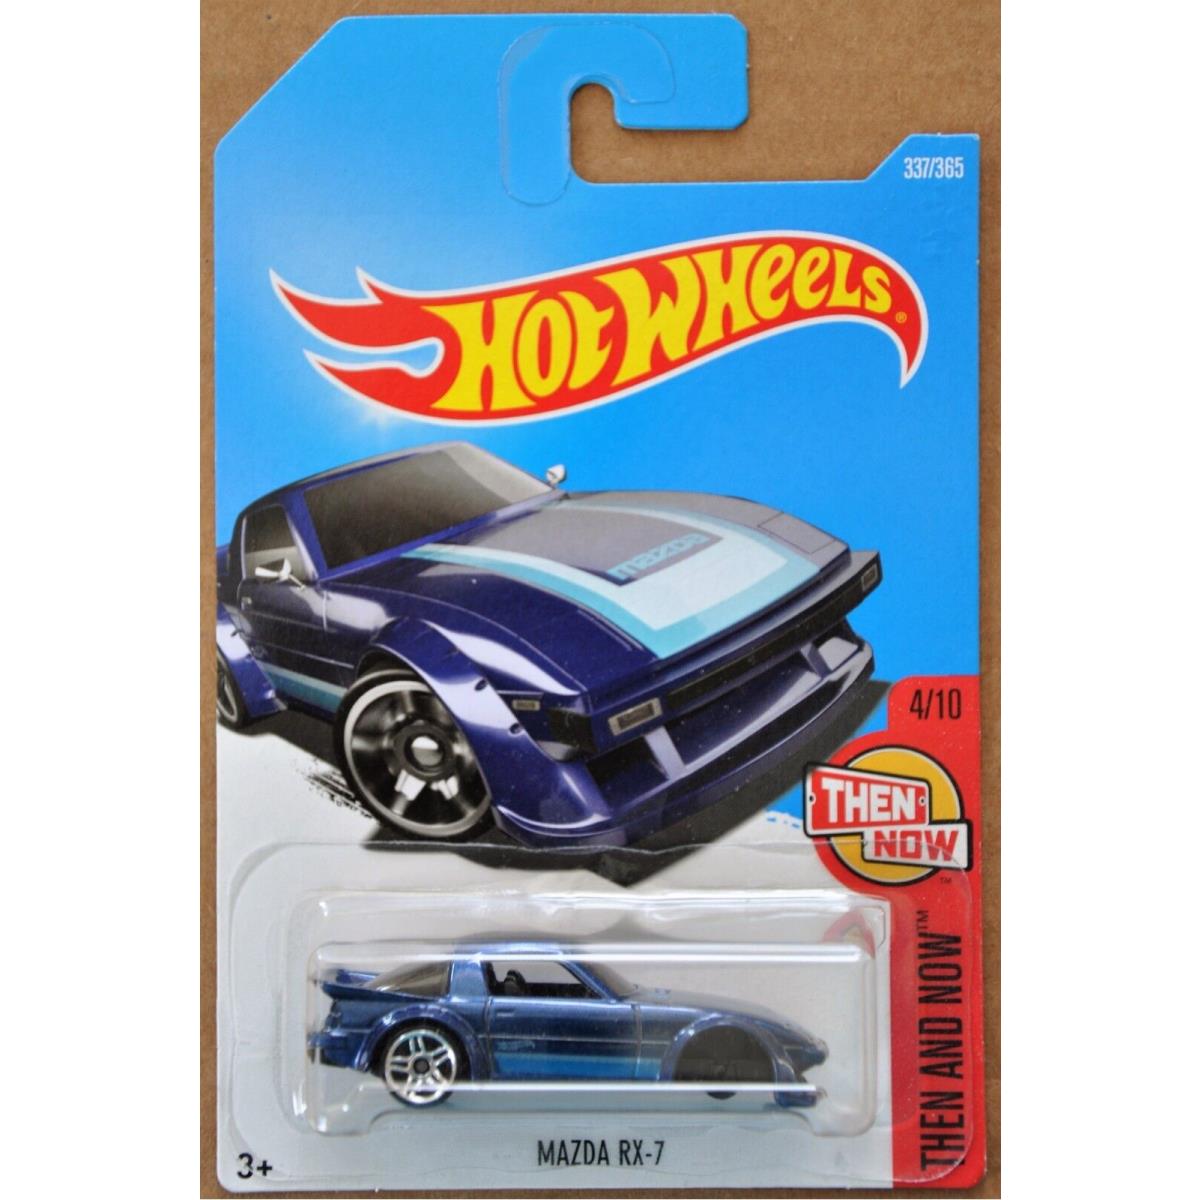 2017 Hot Wheels Mazda RX-7 337/365 Then and Now 4/10 Error Missing Wheels